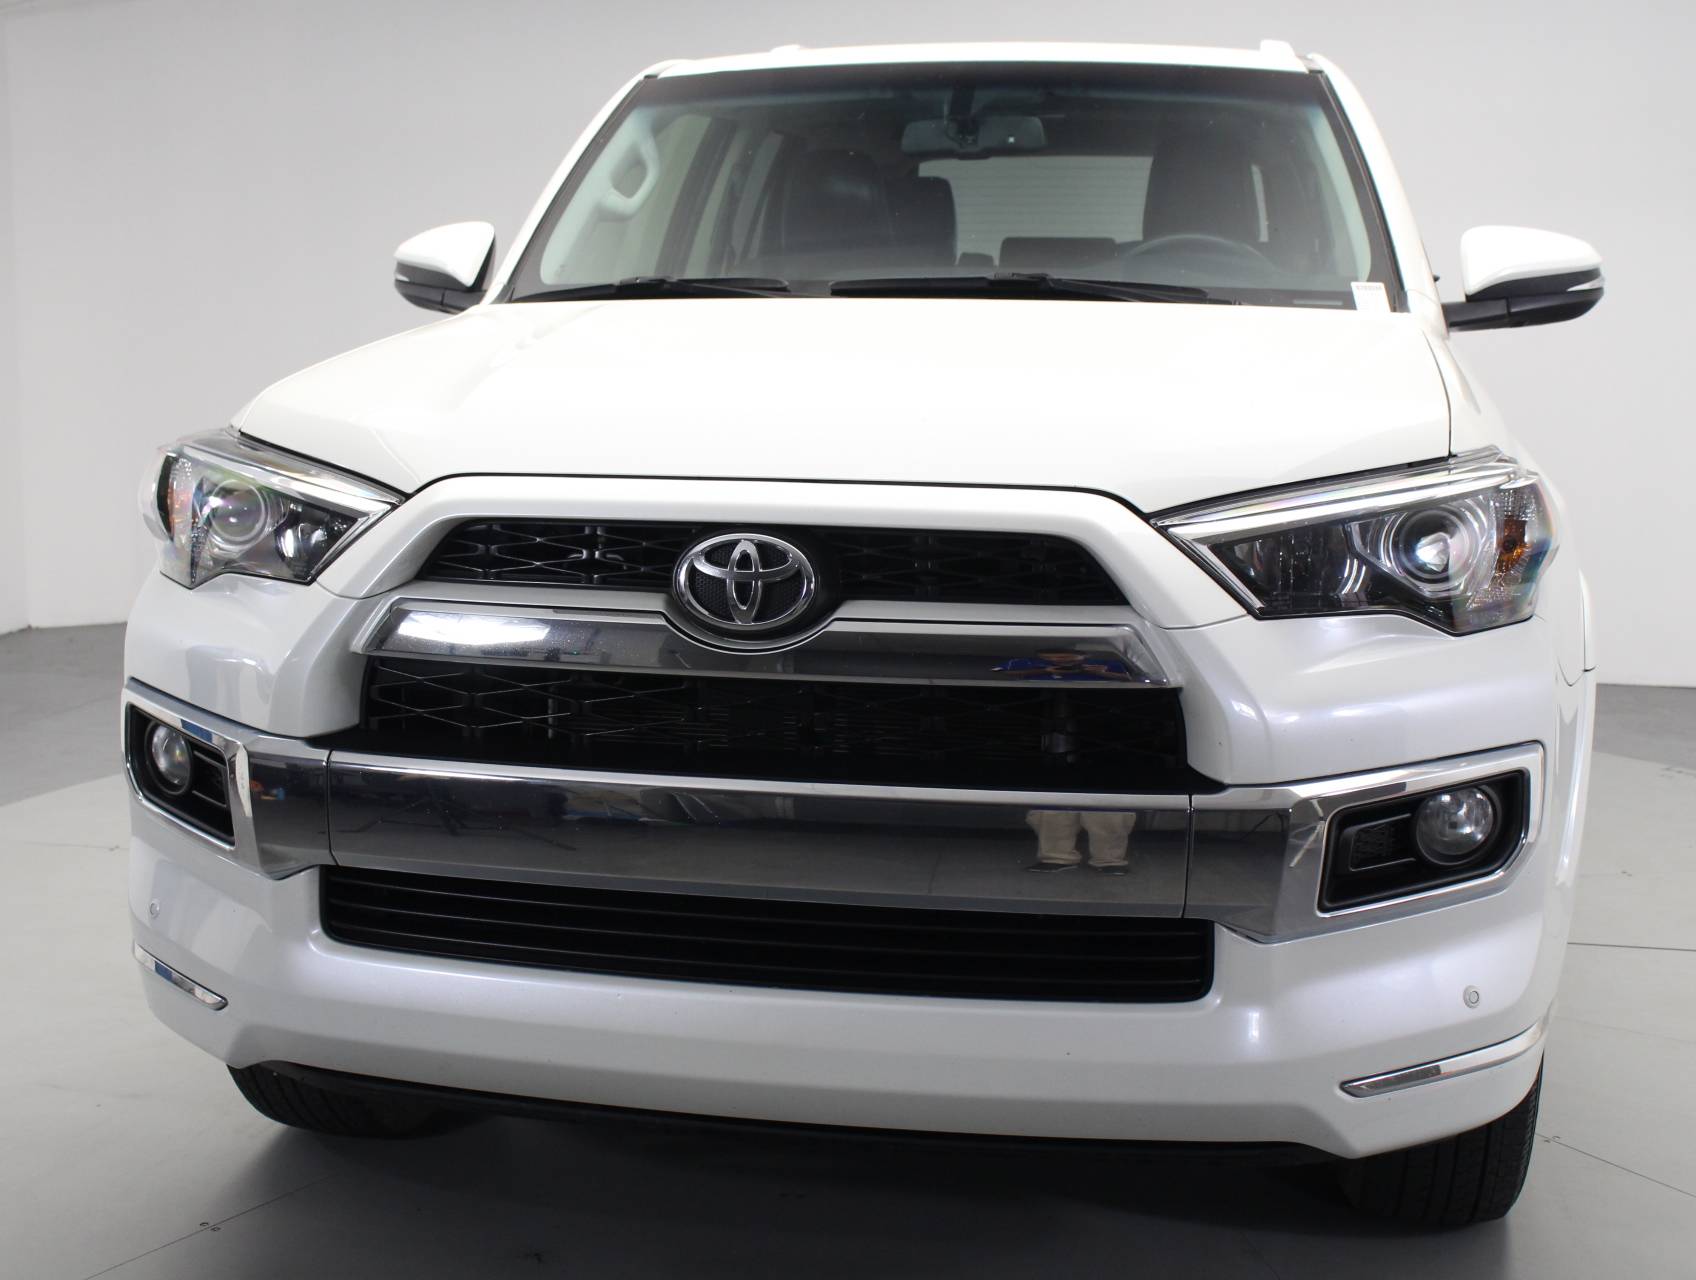 Florida Fine Cars - Used TOYOTA 4RUNNER 2016 WEST PALM Limited 4x4